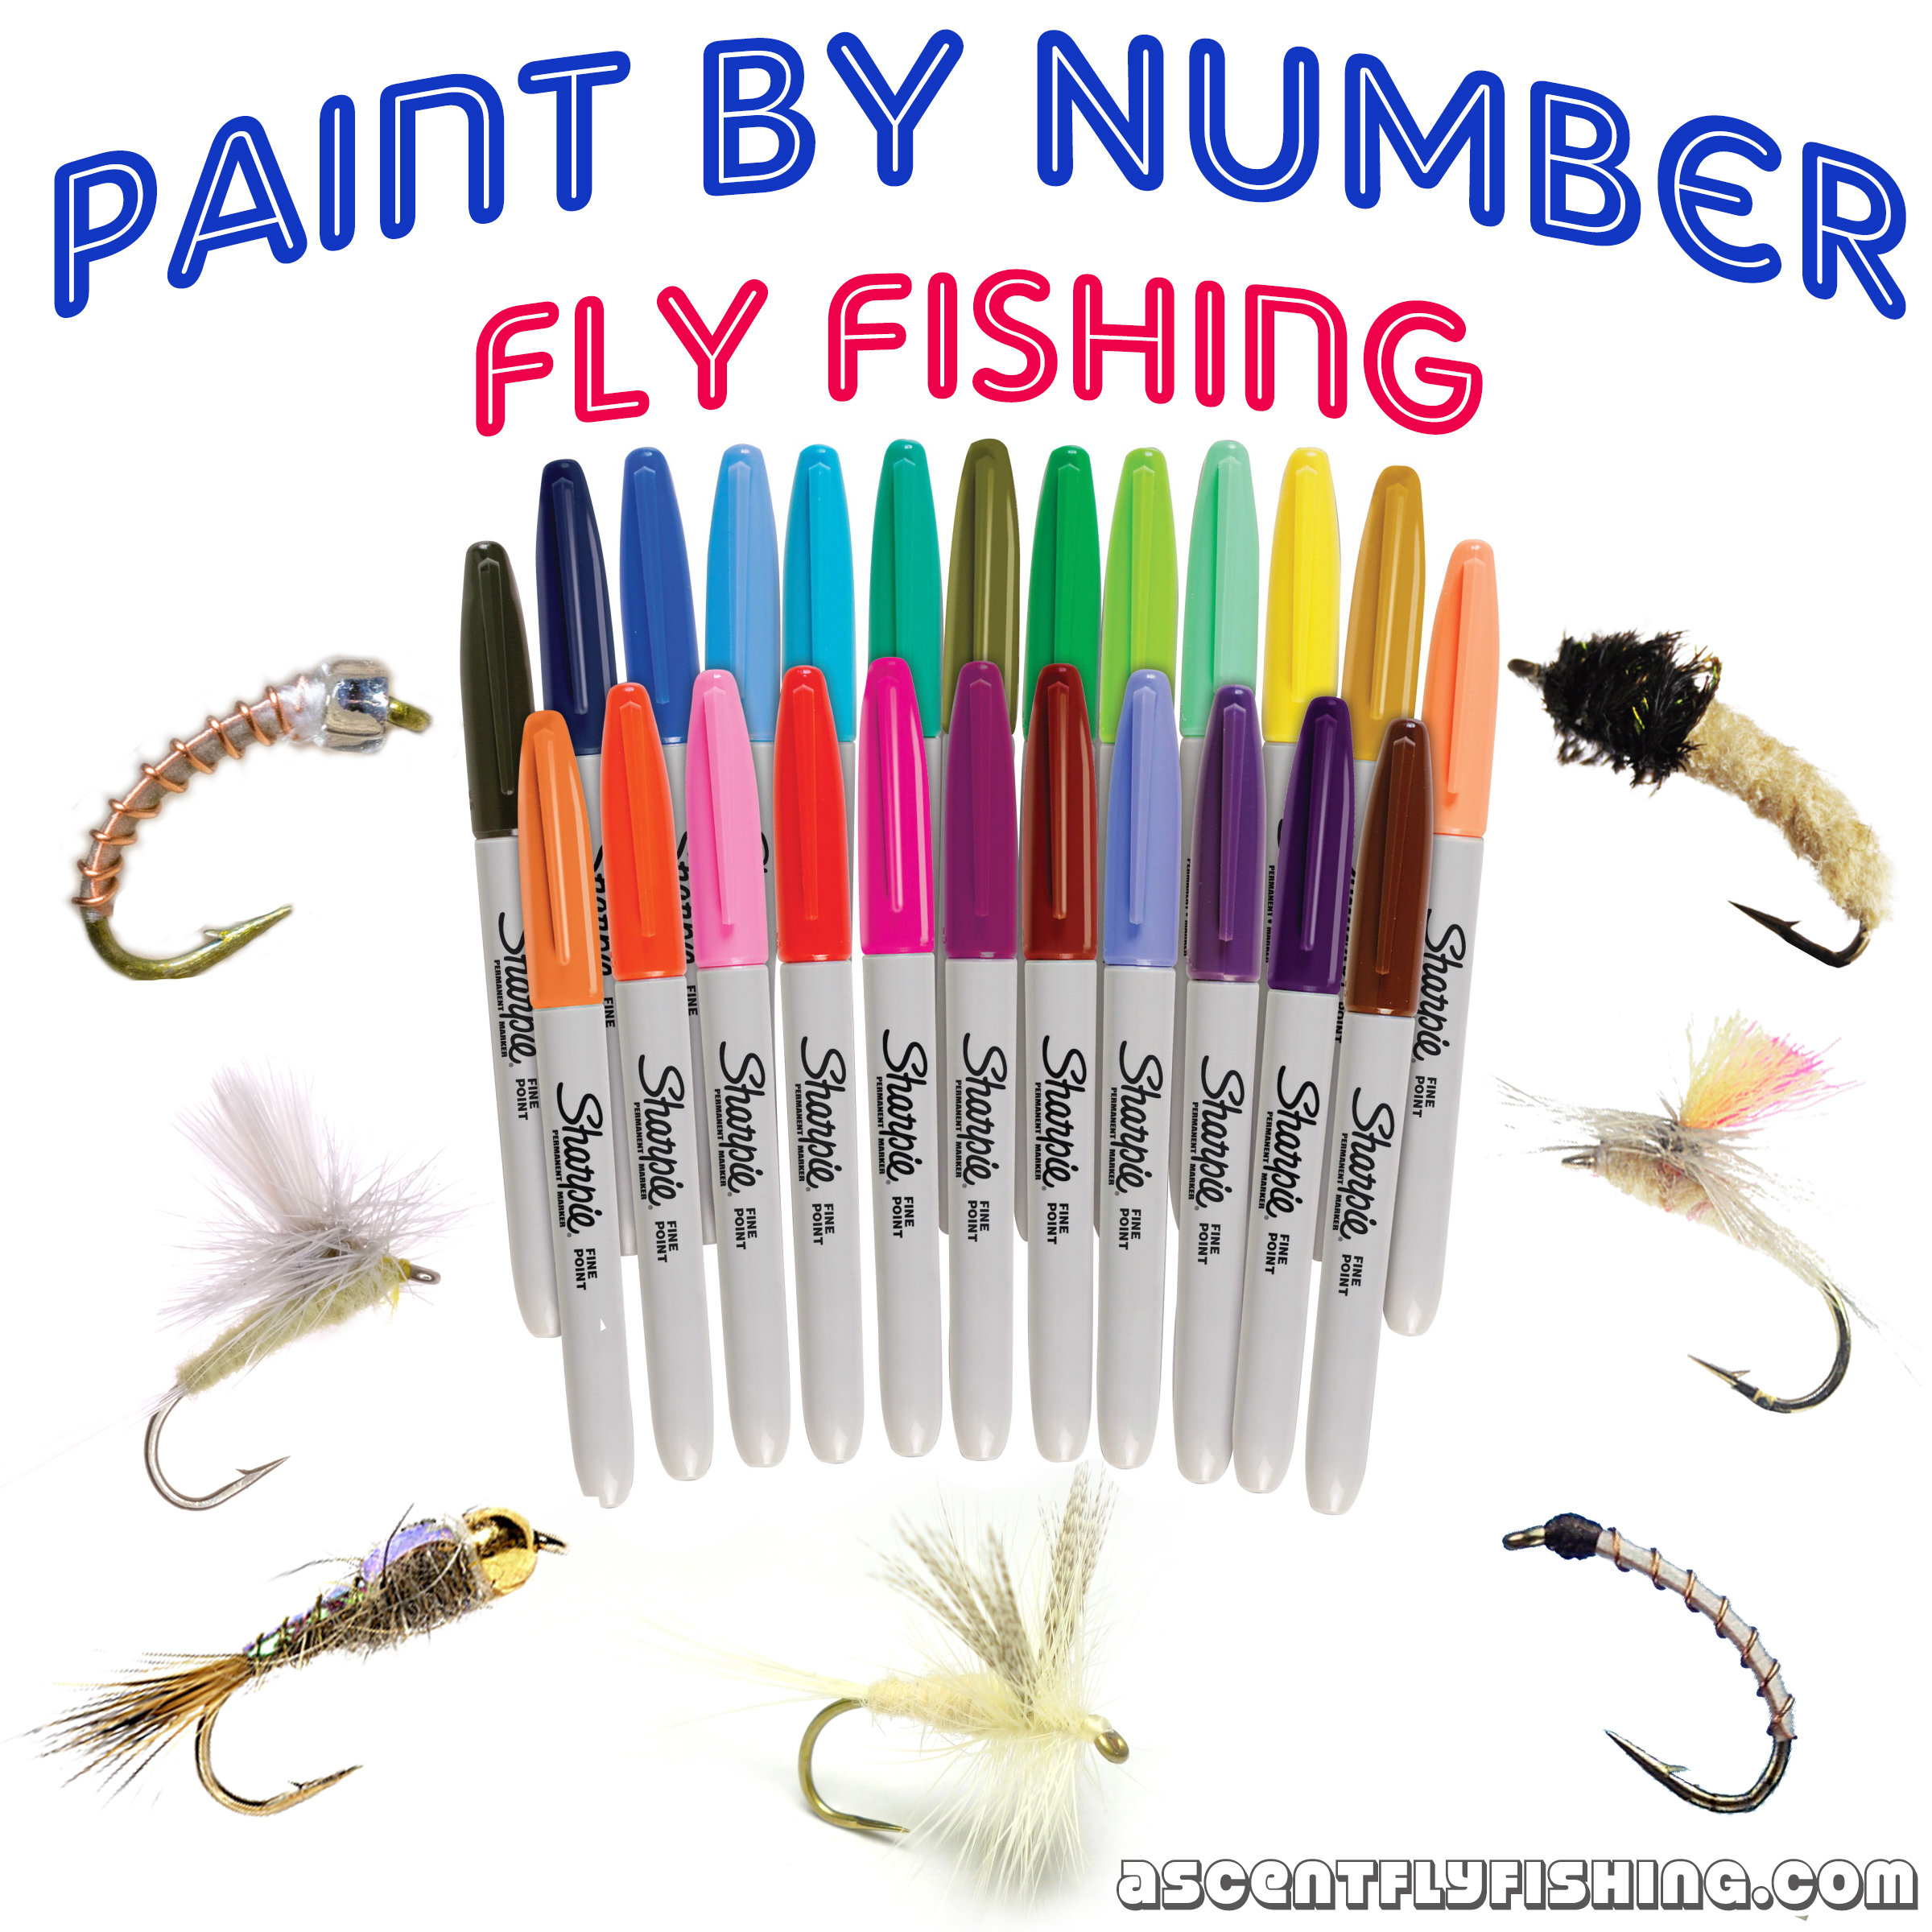 Paint by Number Fly Fishing - Ascent Fly Fishing